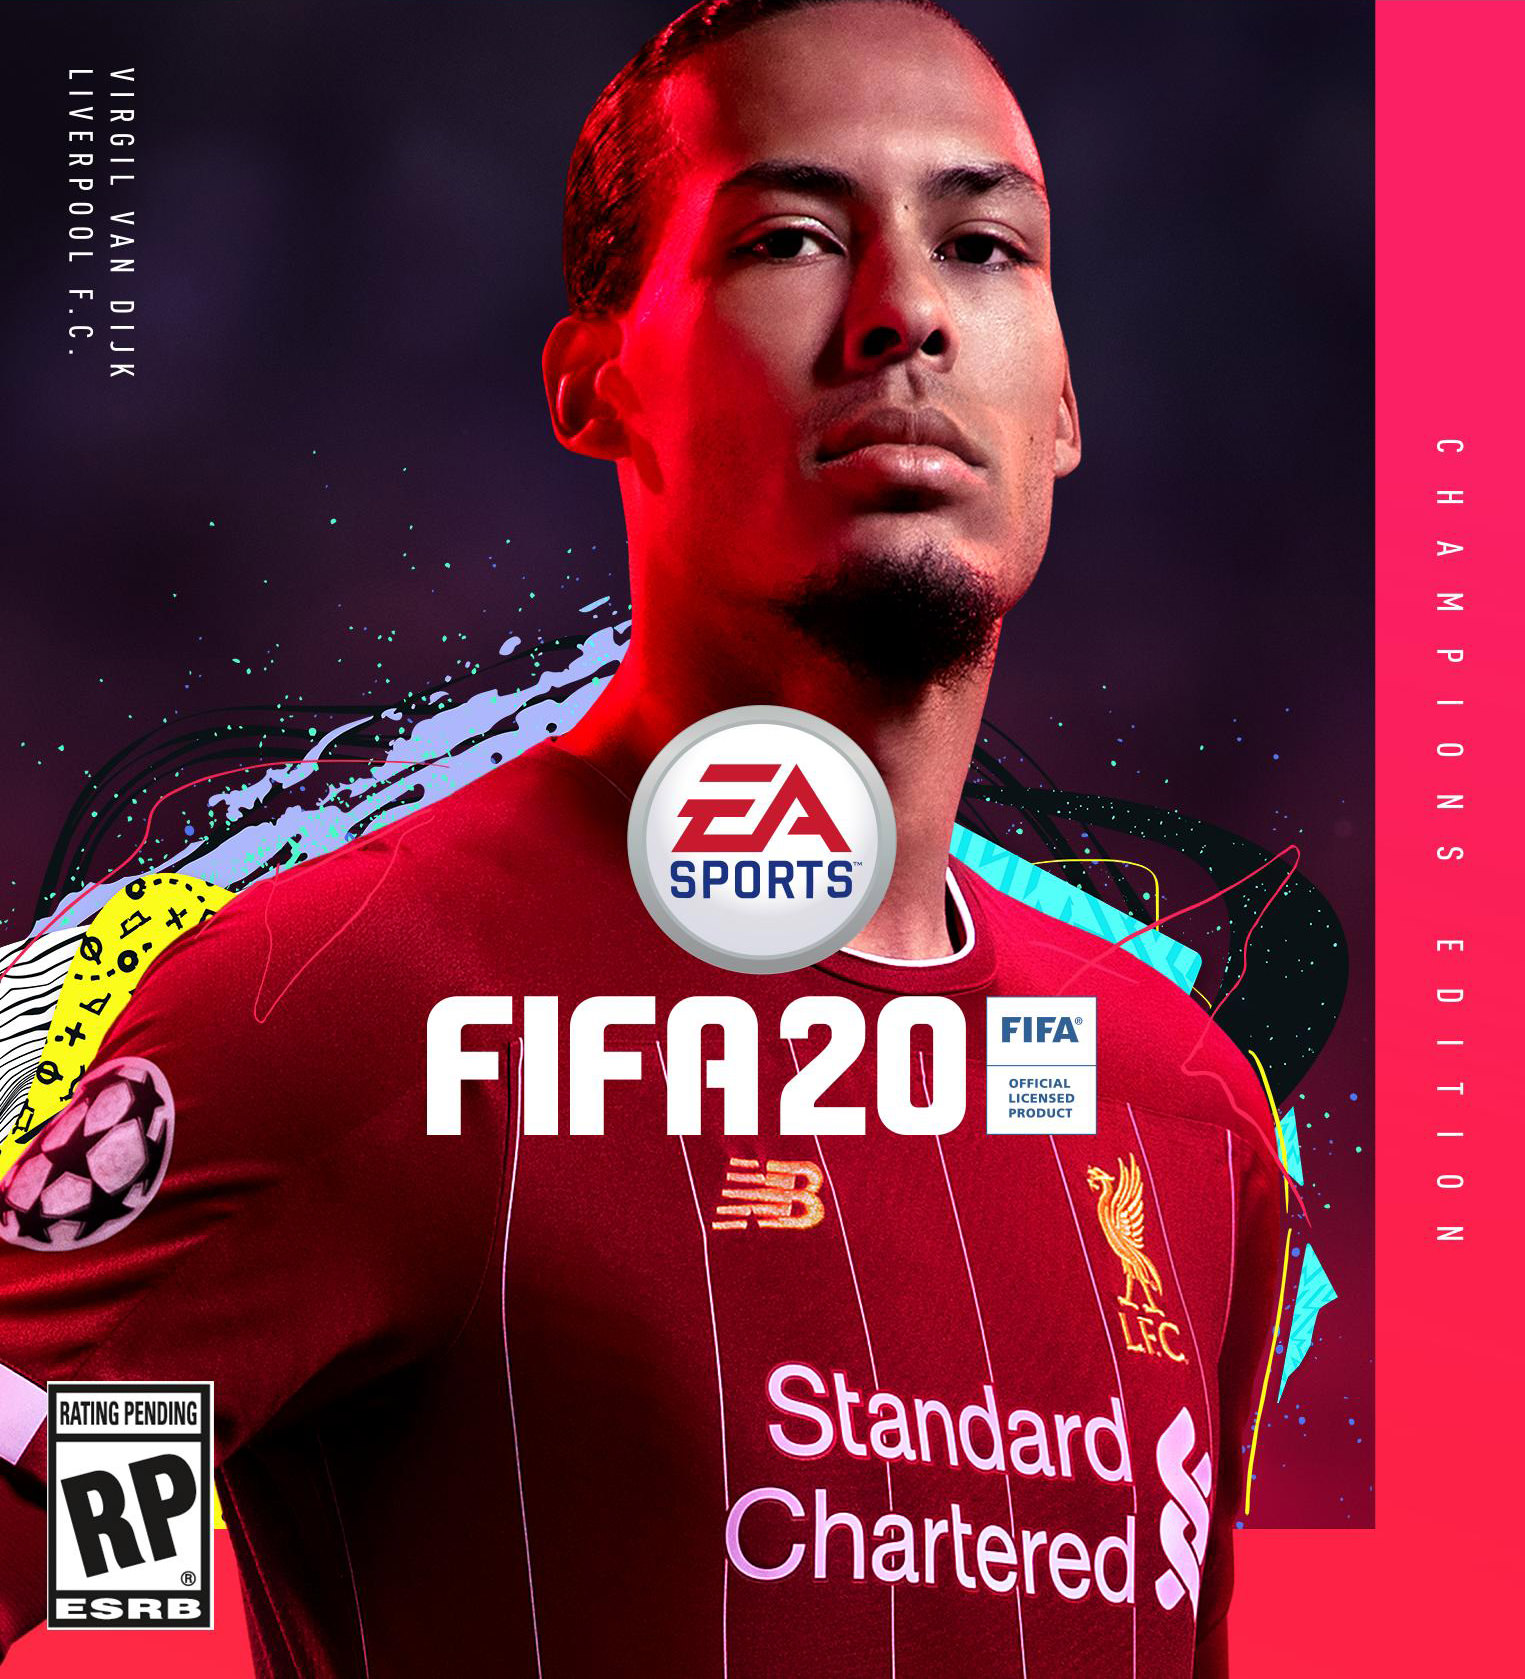 FIFA 20: Everything about this year's game - Demo release, Ultimate Team, Career mode, VOLVA, gameplay reveal and